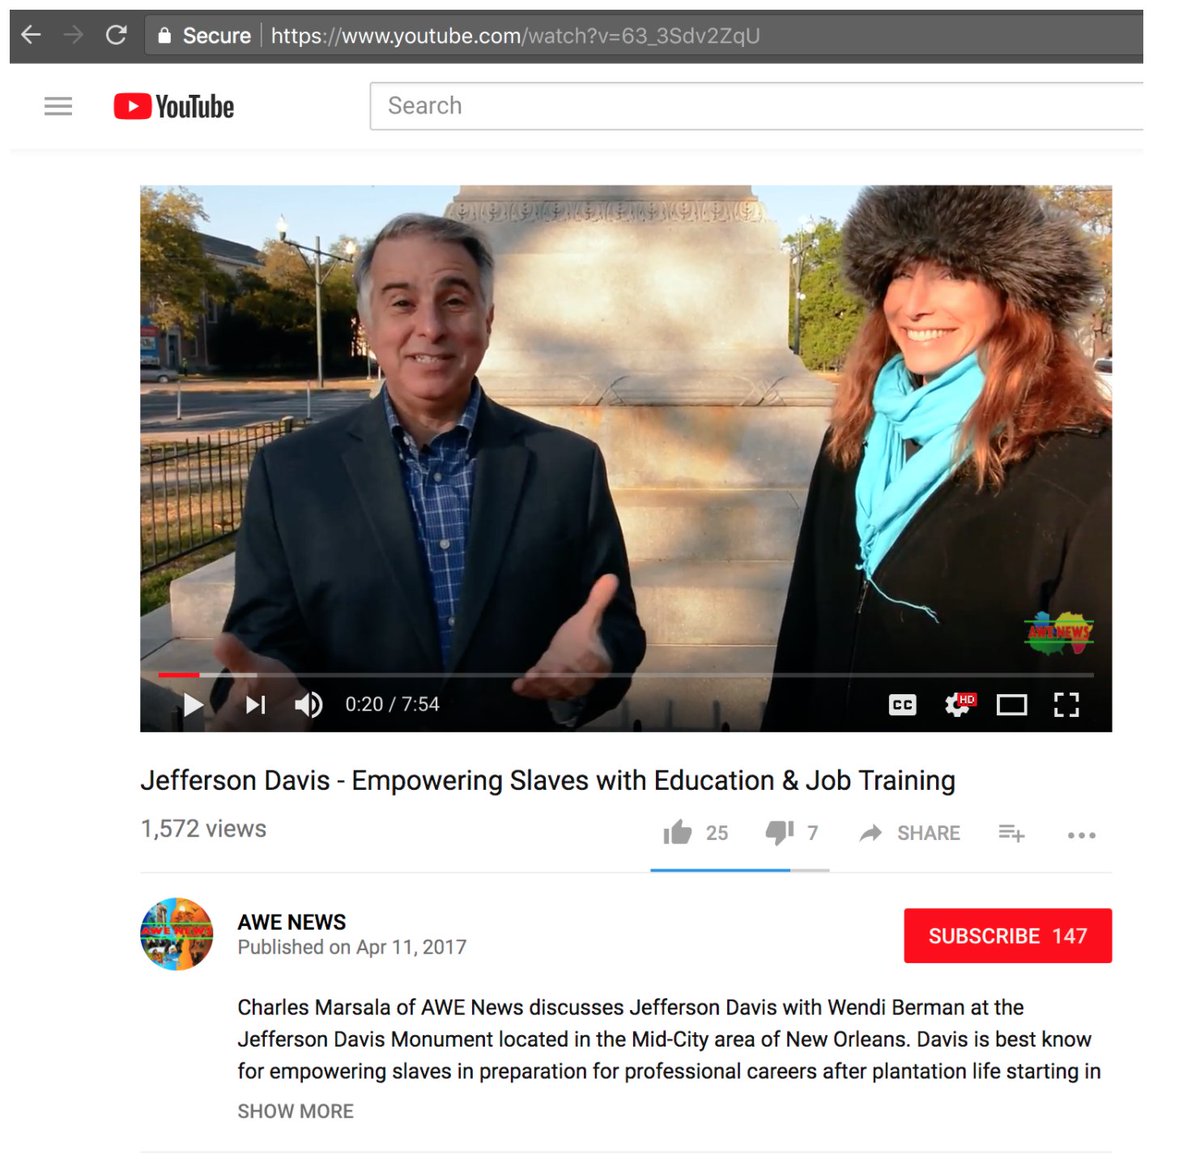 At various stops, Marsala links to his self-produced videos that include Lost Cause propaganda. At the former site of the Jefferson Davis monument he includes a video that claims Jefferson Davis was “empowering slaves with education and job training”. 